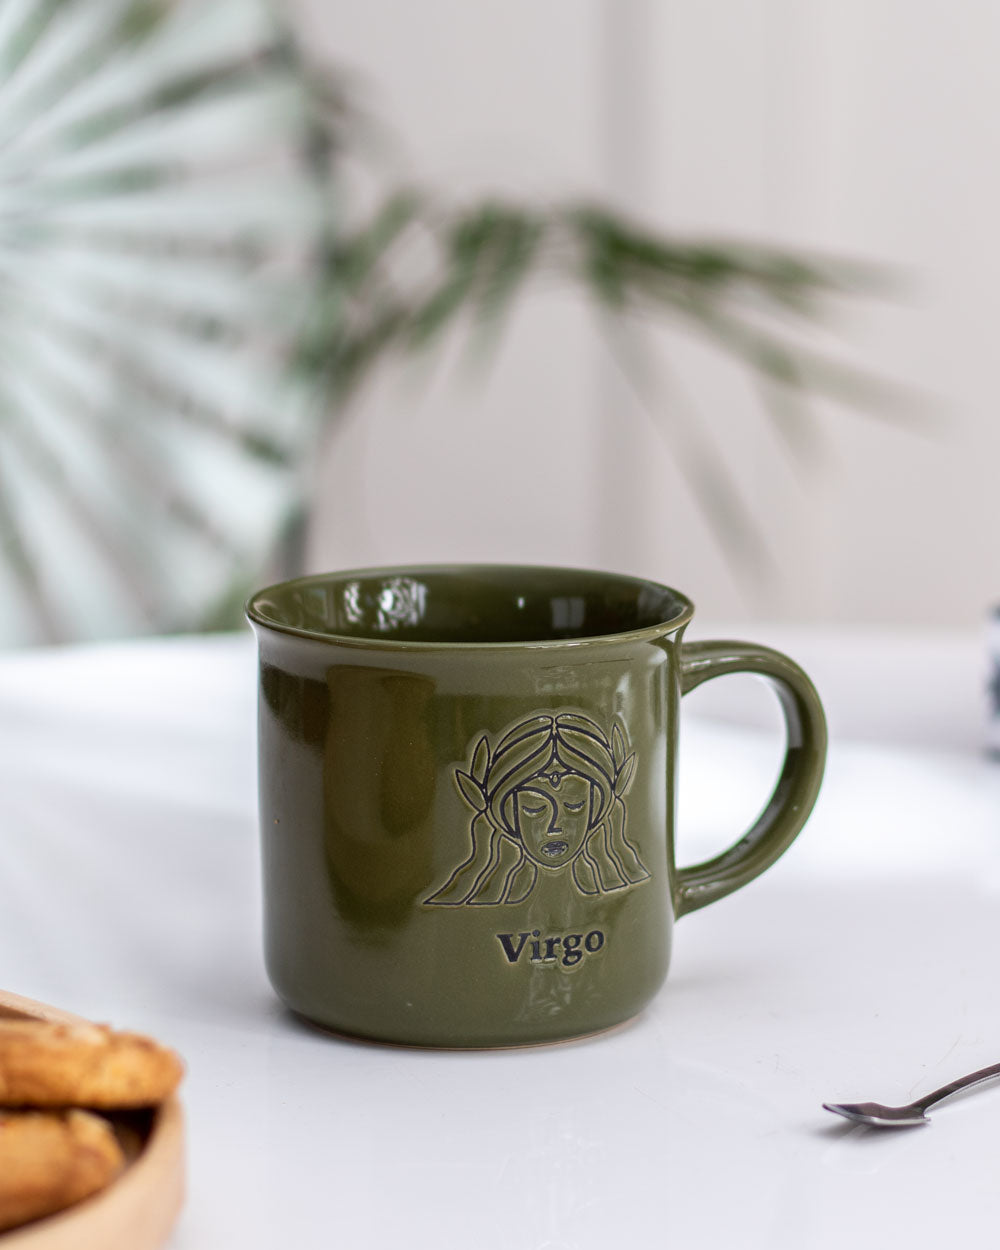 Virgo astrological sign mug in a soothing green hue with a golden design, creating a serene coffee experience, against a blurred plant backdrop.